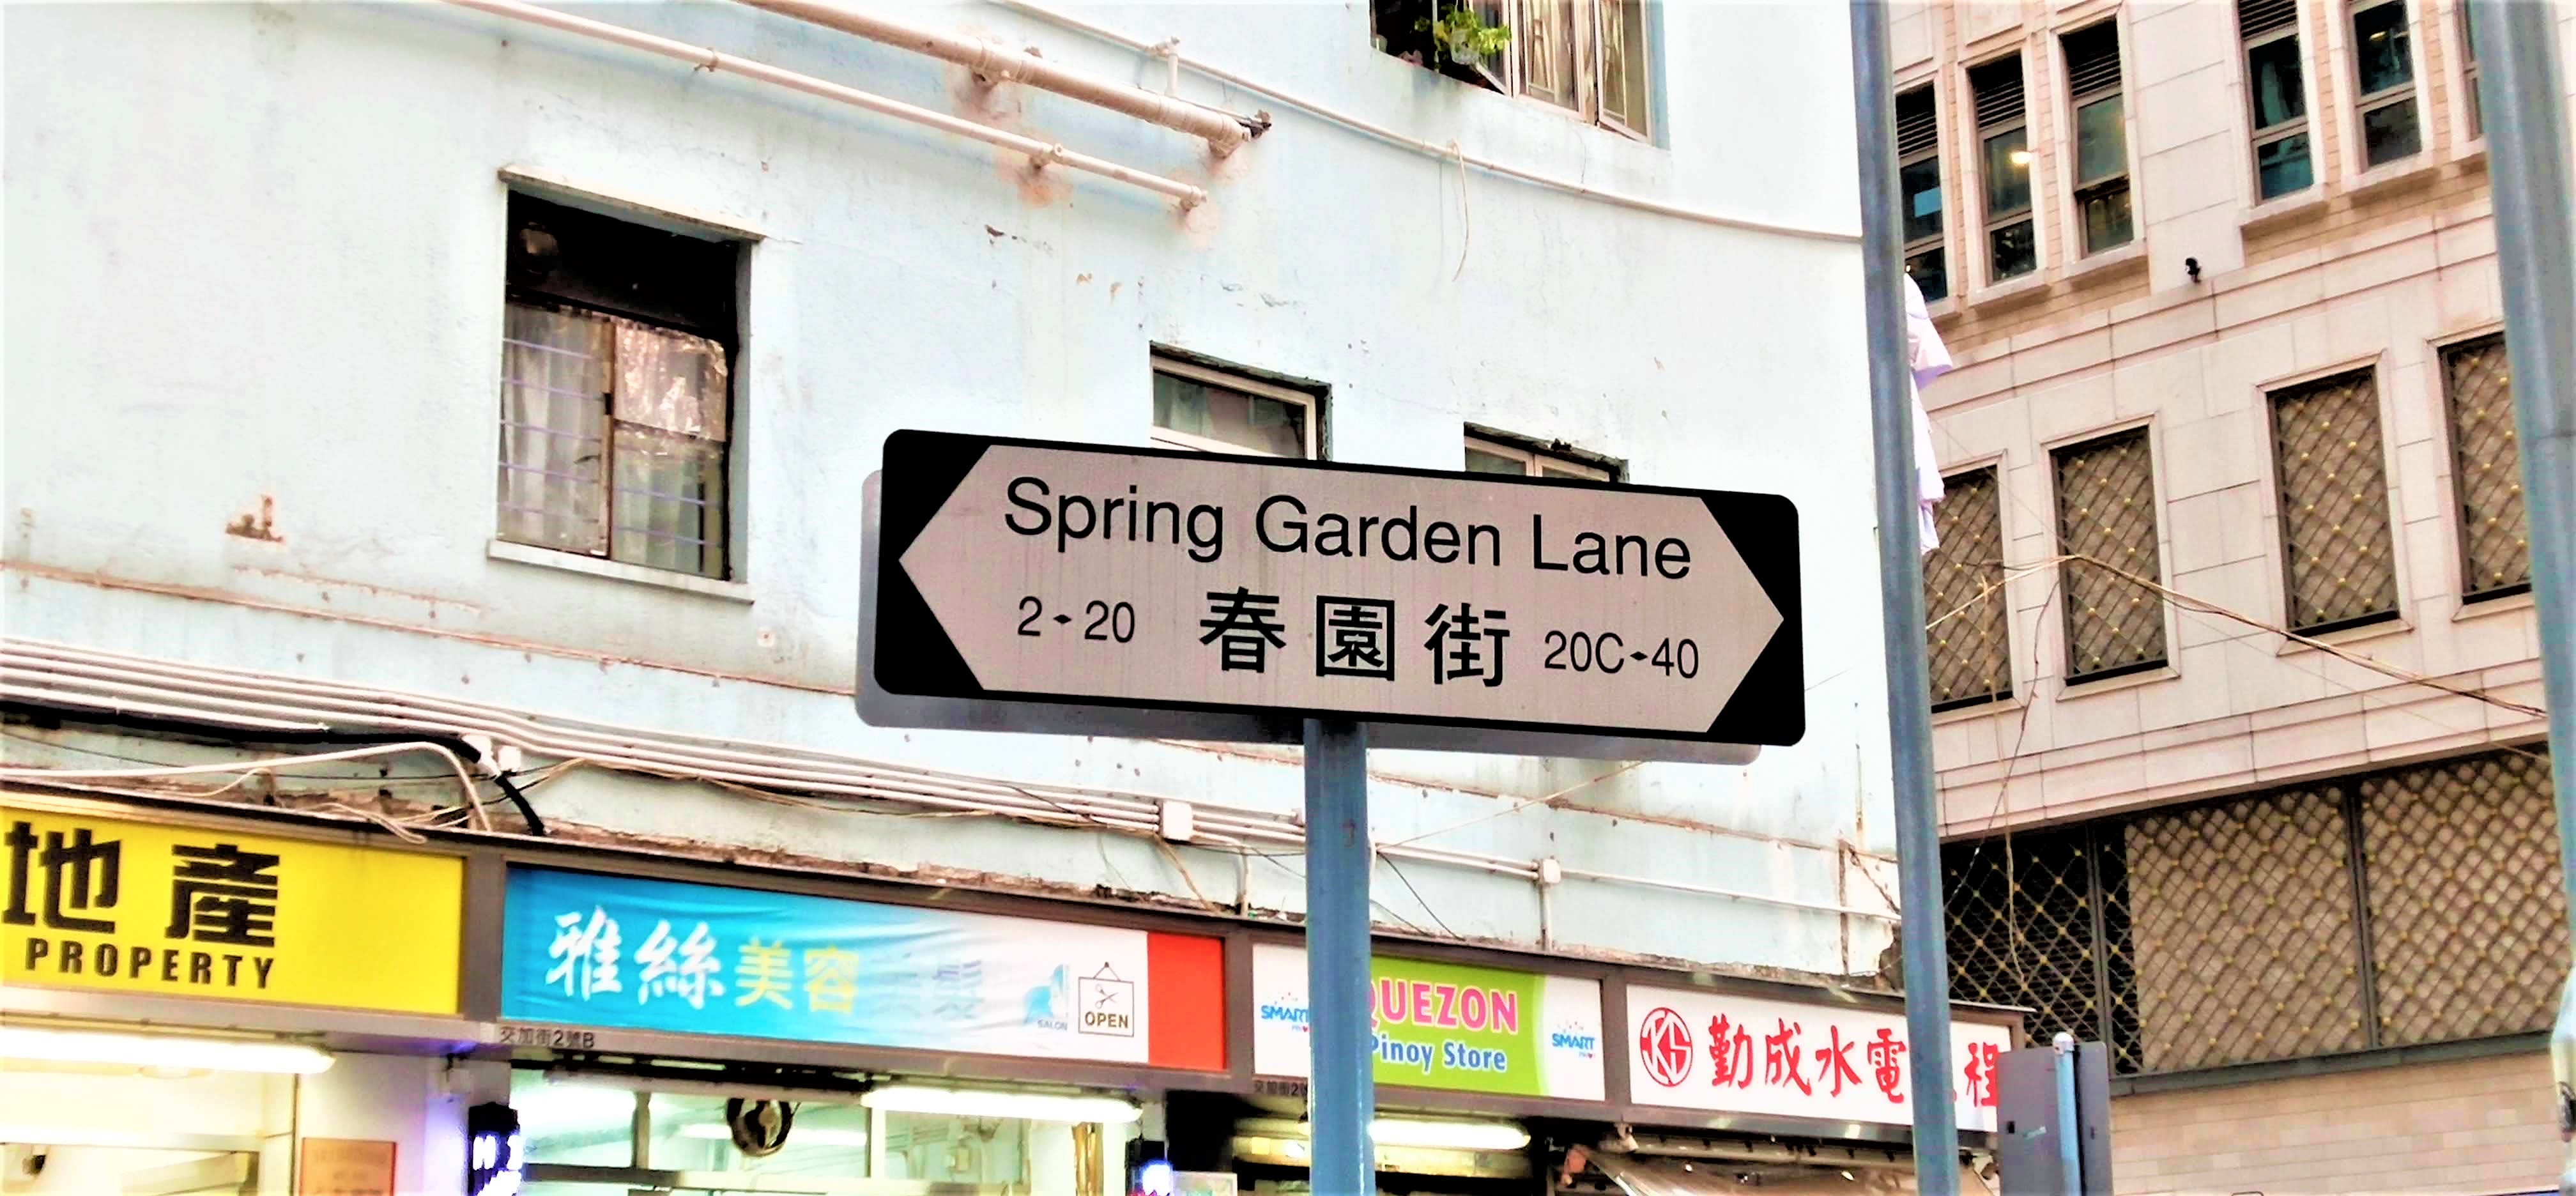 The street name is the most important relic of Dent's Spring Garden house.